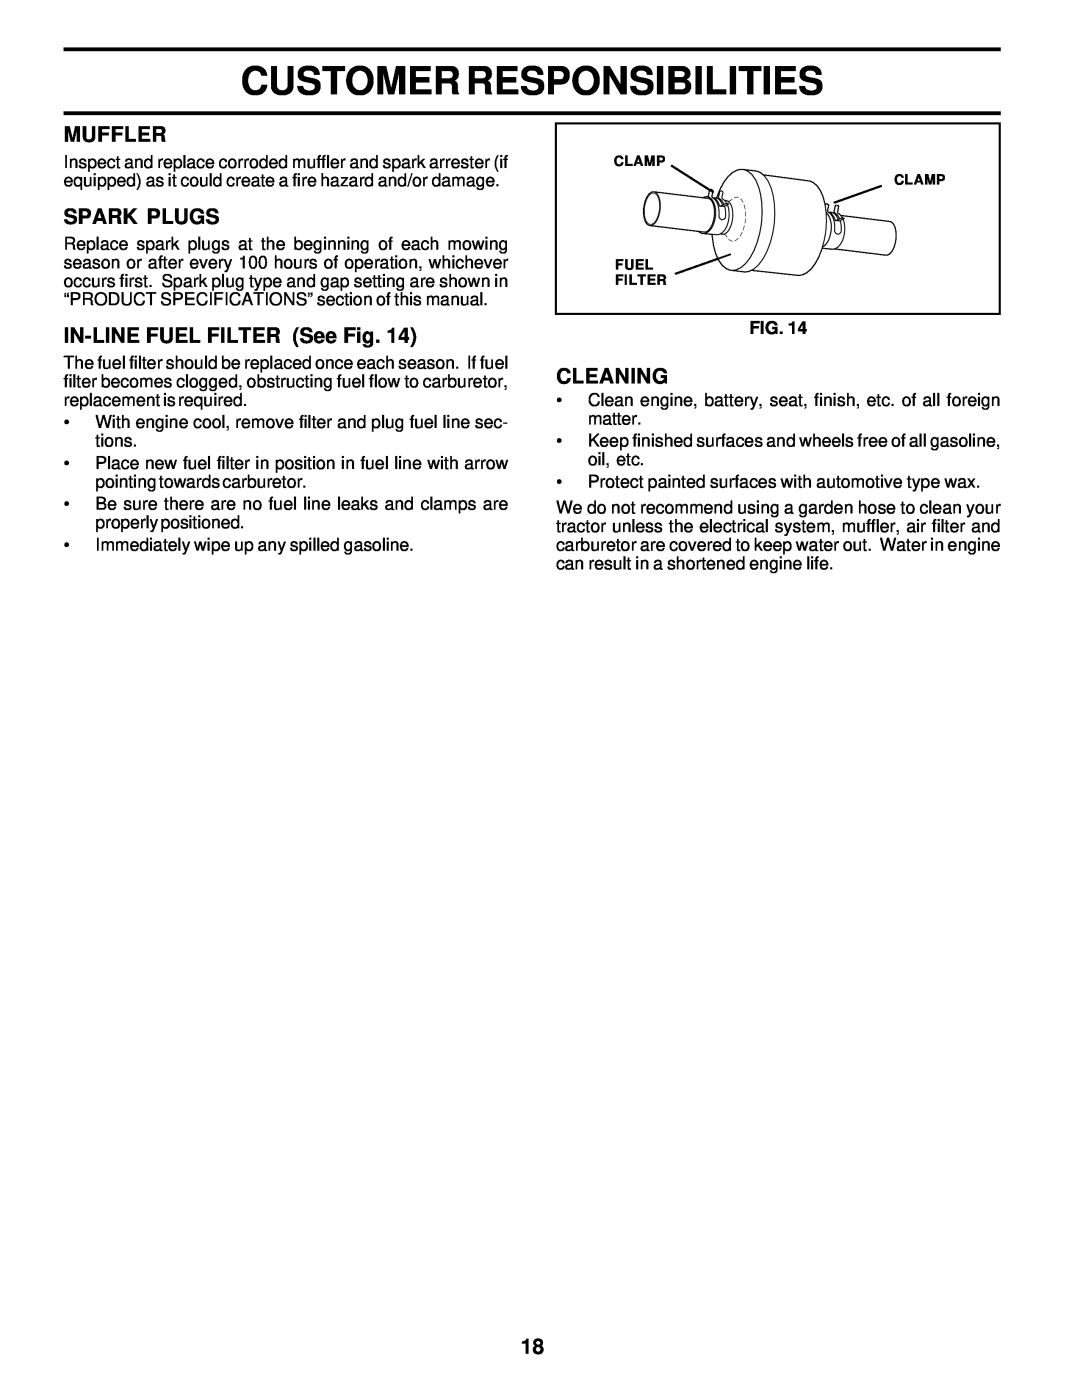 Weed Eater 171883 manual Muffler, Spark Plugs, IN-LINE FUEL FILTER See Fig, Cleaning, Customer Responsibilities 